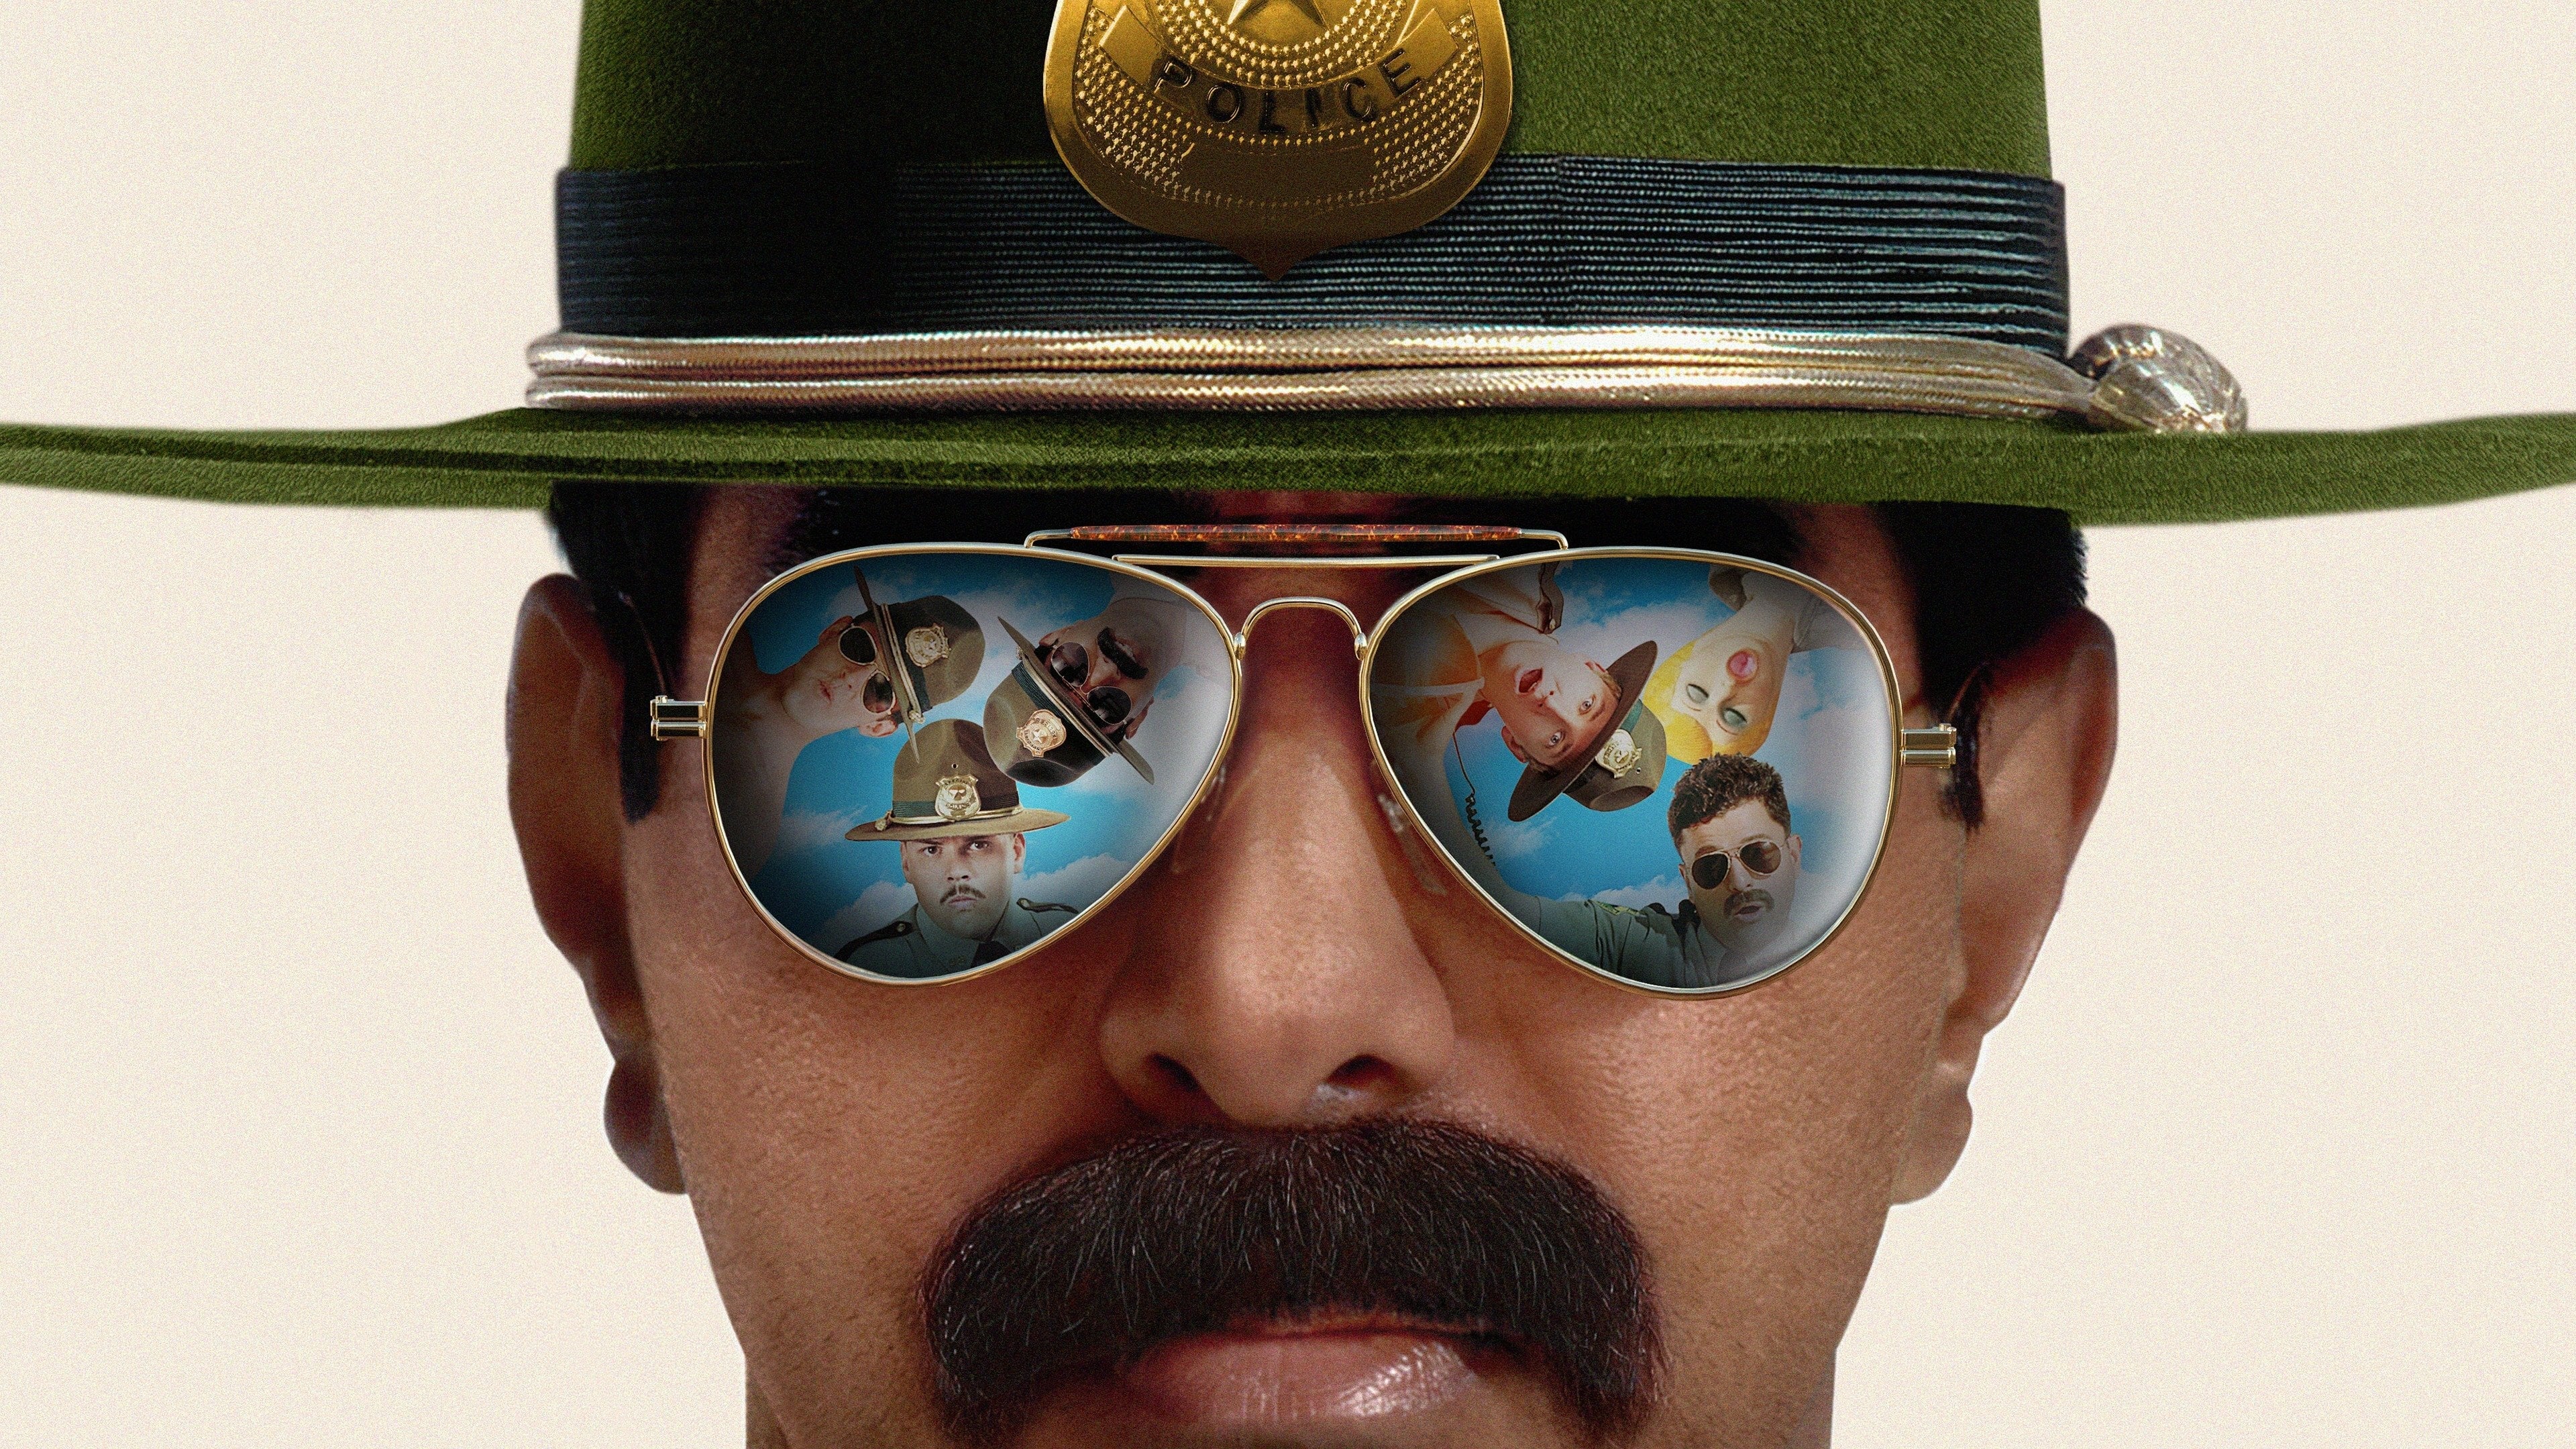 Super Troopers 2001 Soap2Day